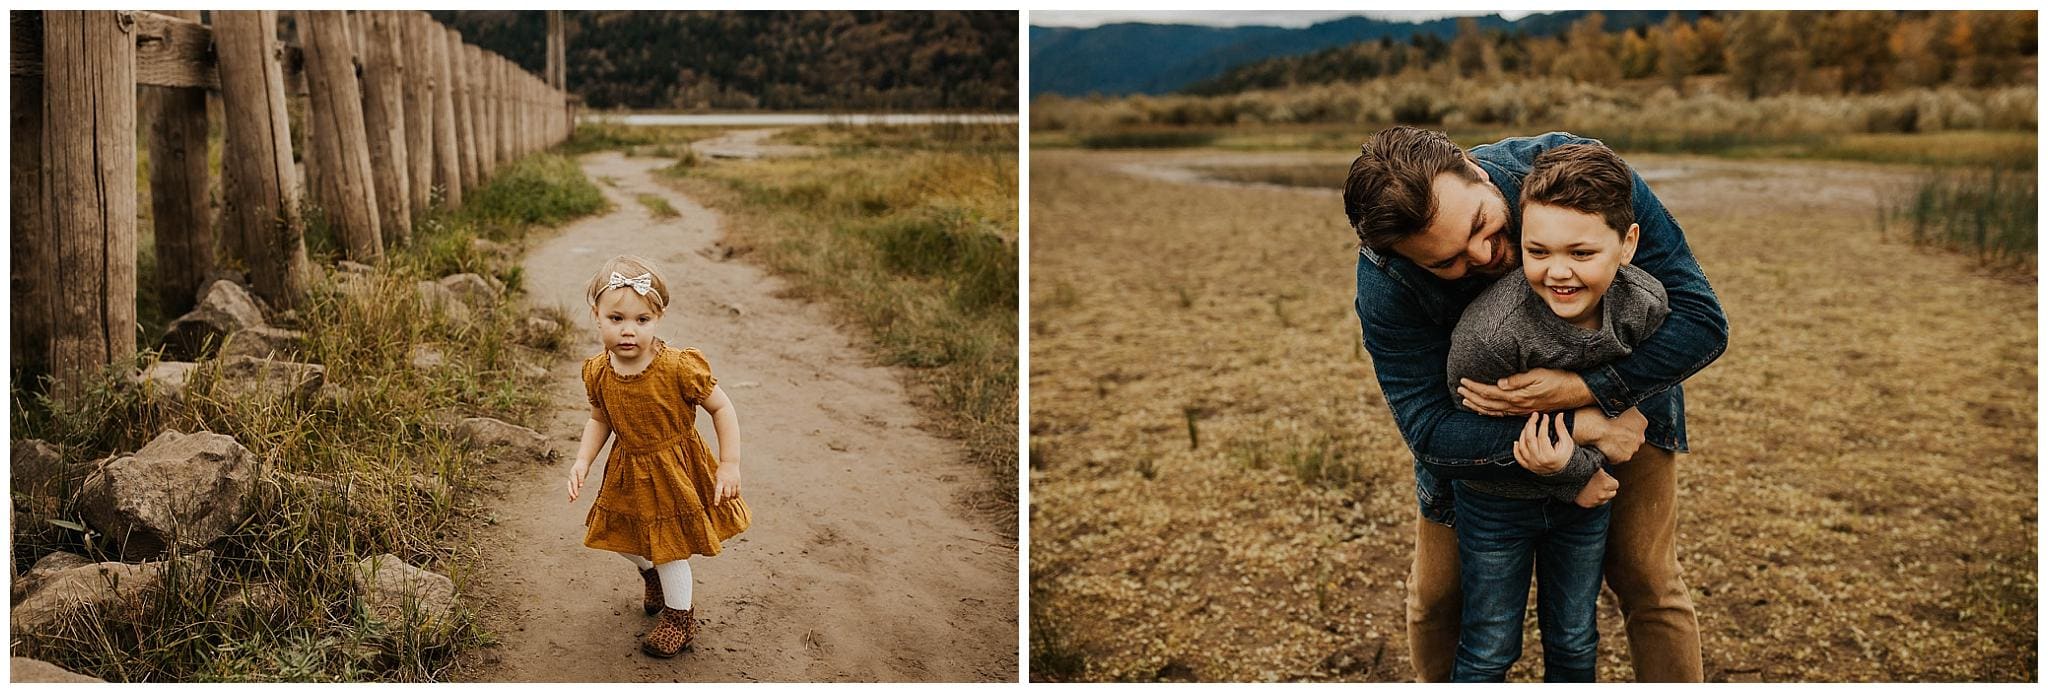 Little girl in yellow dress walking, dad hugging son and laughing - Portland family portraits